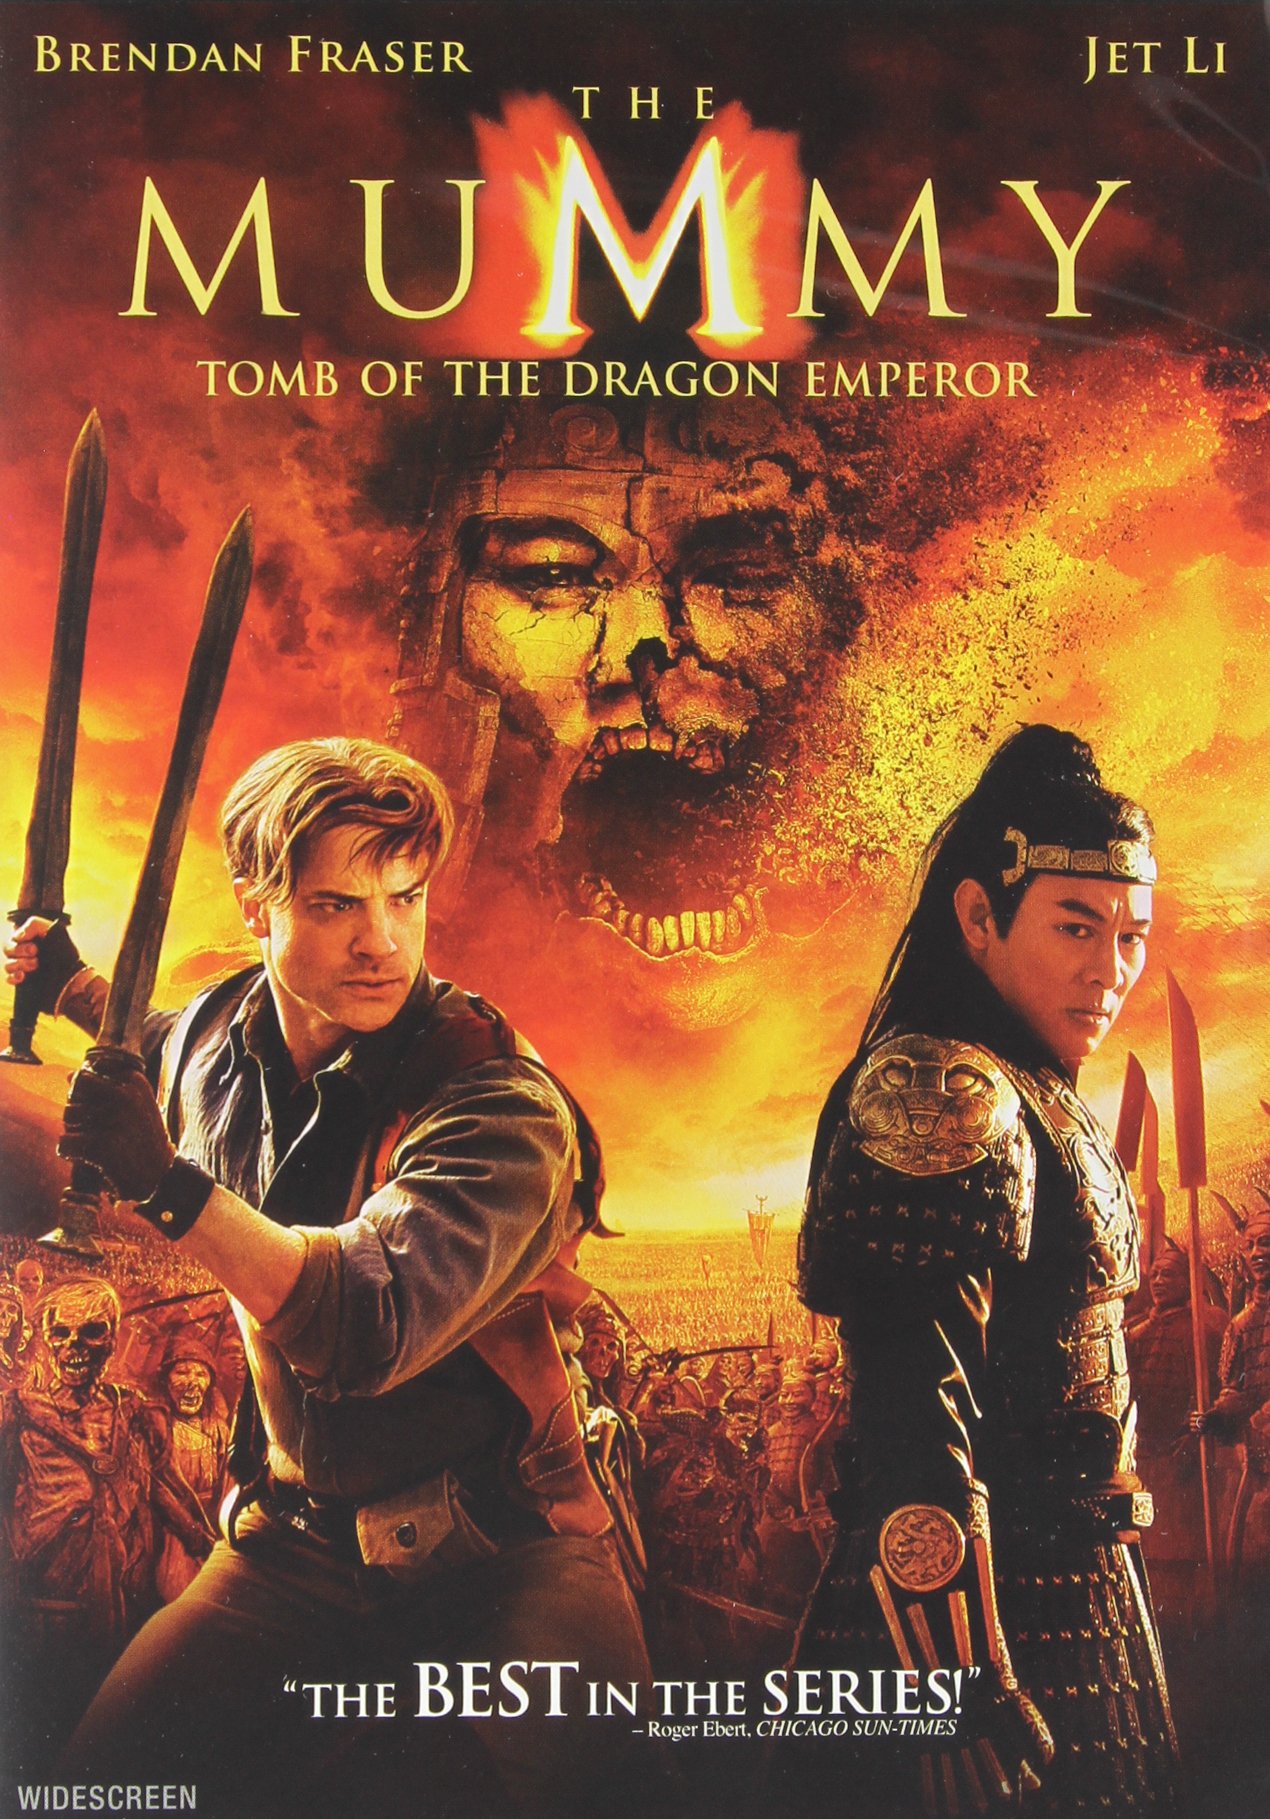 The Mummy: Tomb of the Dragon Emperor DVD Release Date January 3, 2010